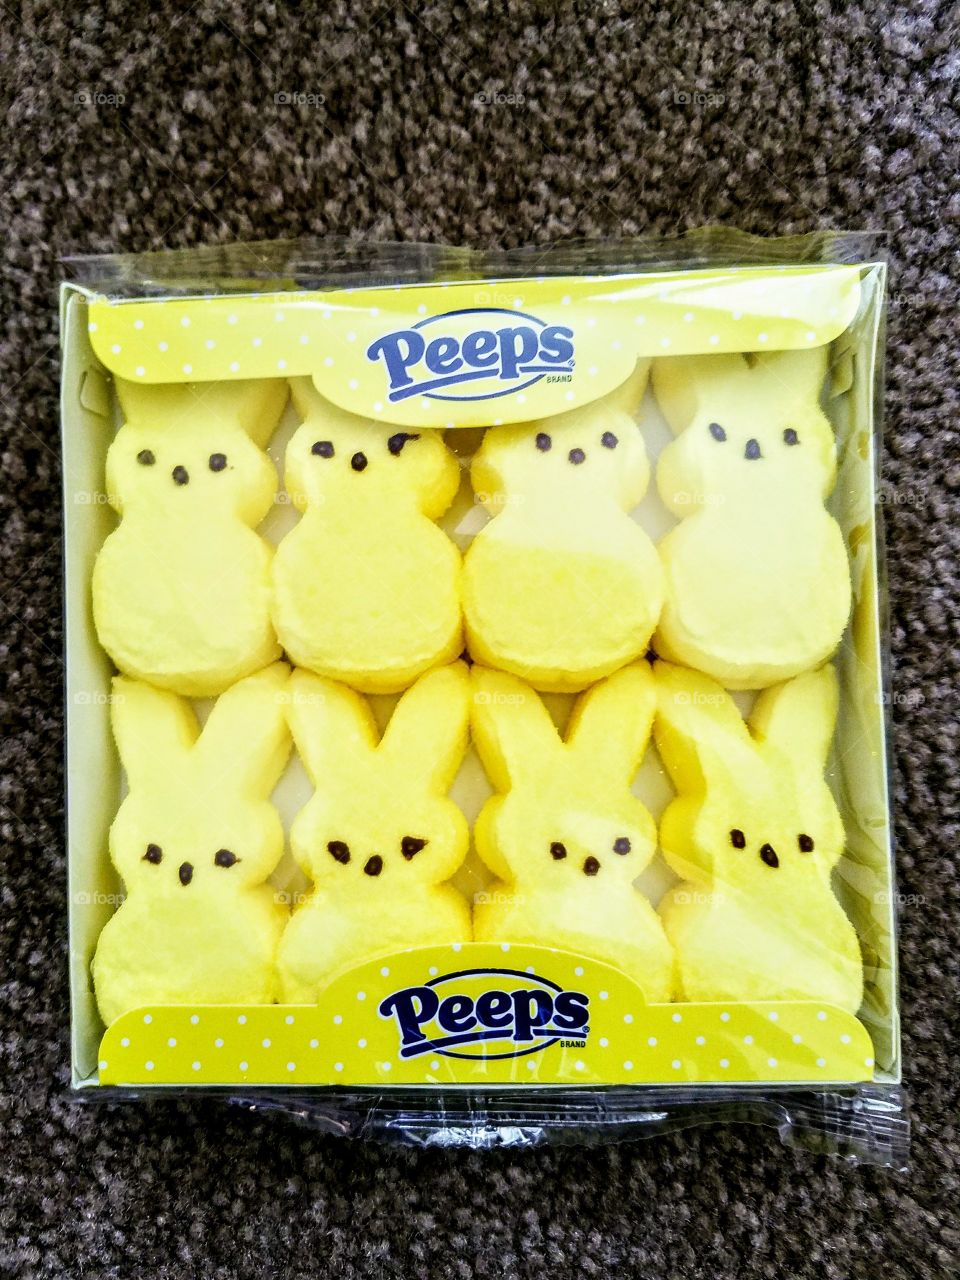 There's No Easter Without Peeps